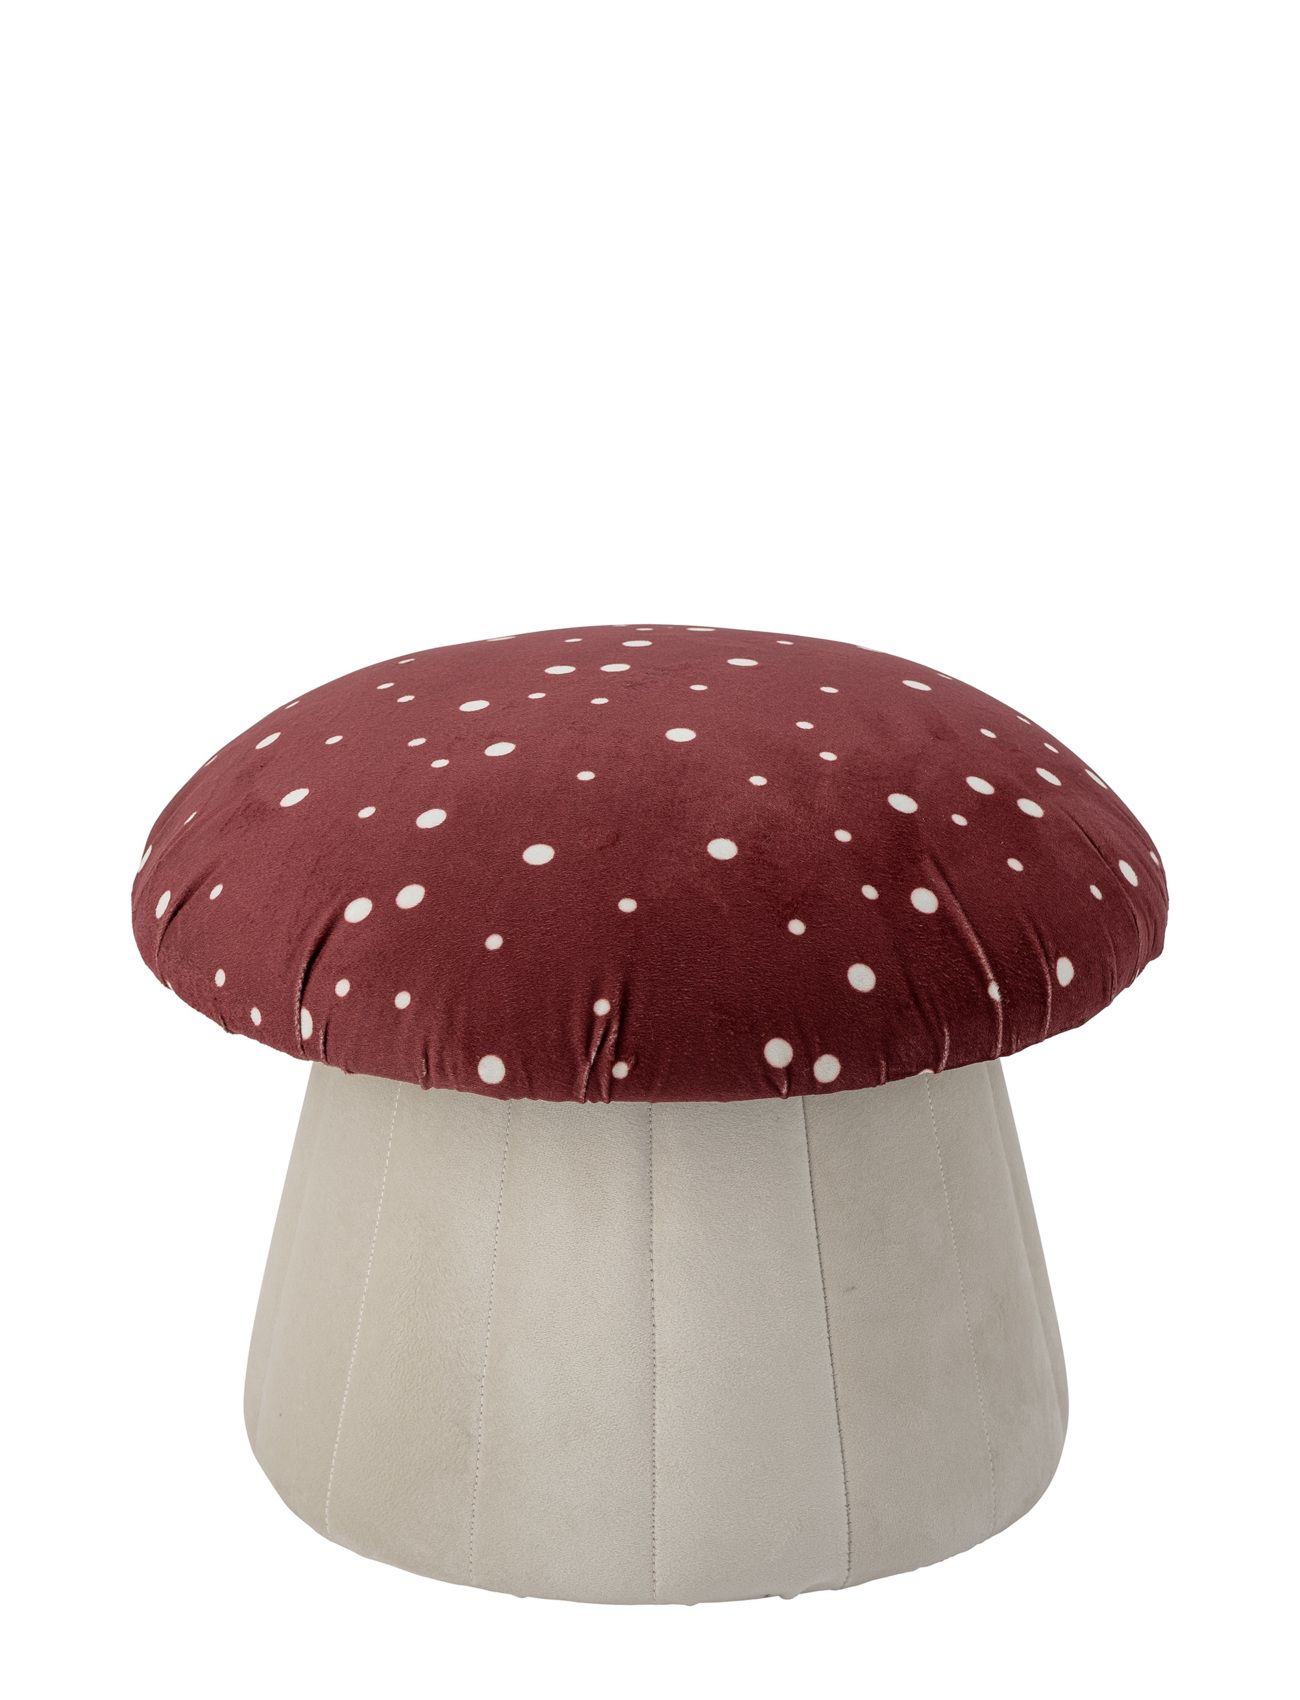 Lue Pouf, Red, Polyester Home Kids Decor Multi/patterned Bloomingville